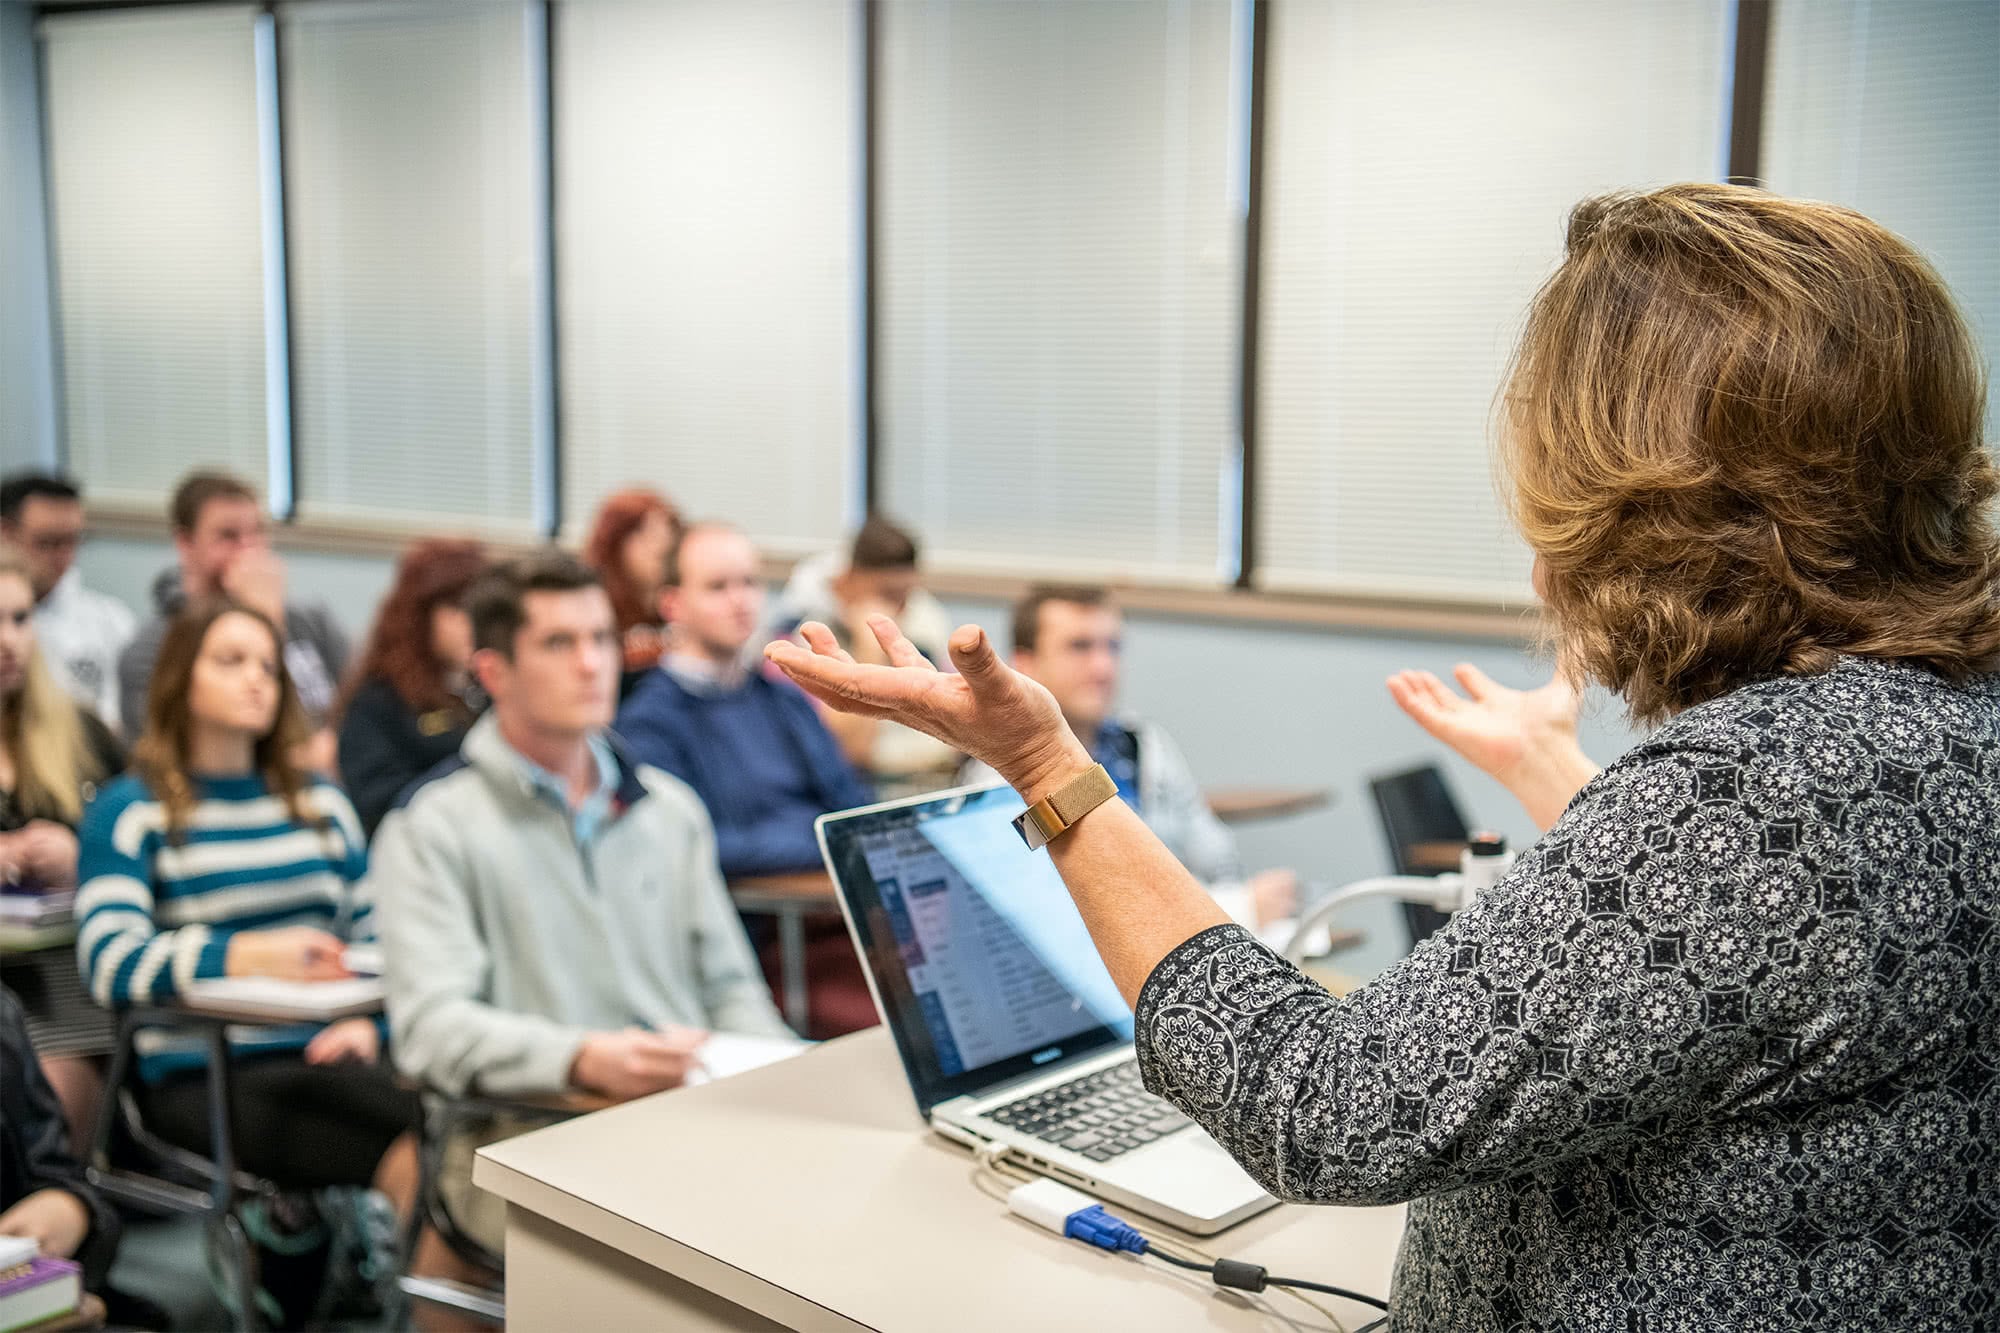 Female teacher standing at classroom podium and holding her hands upwards.